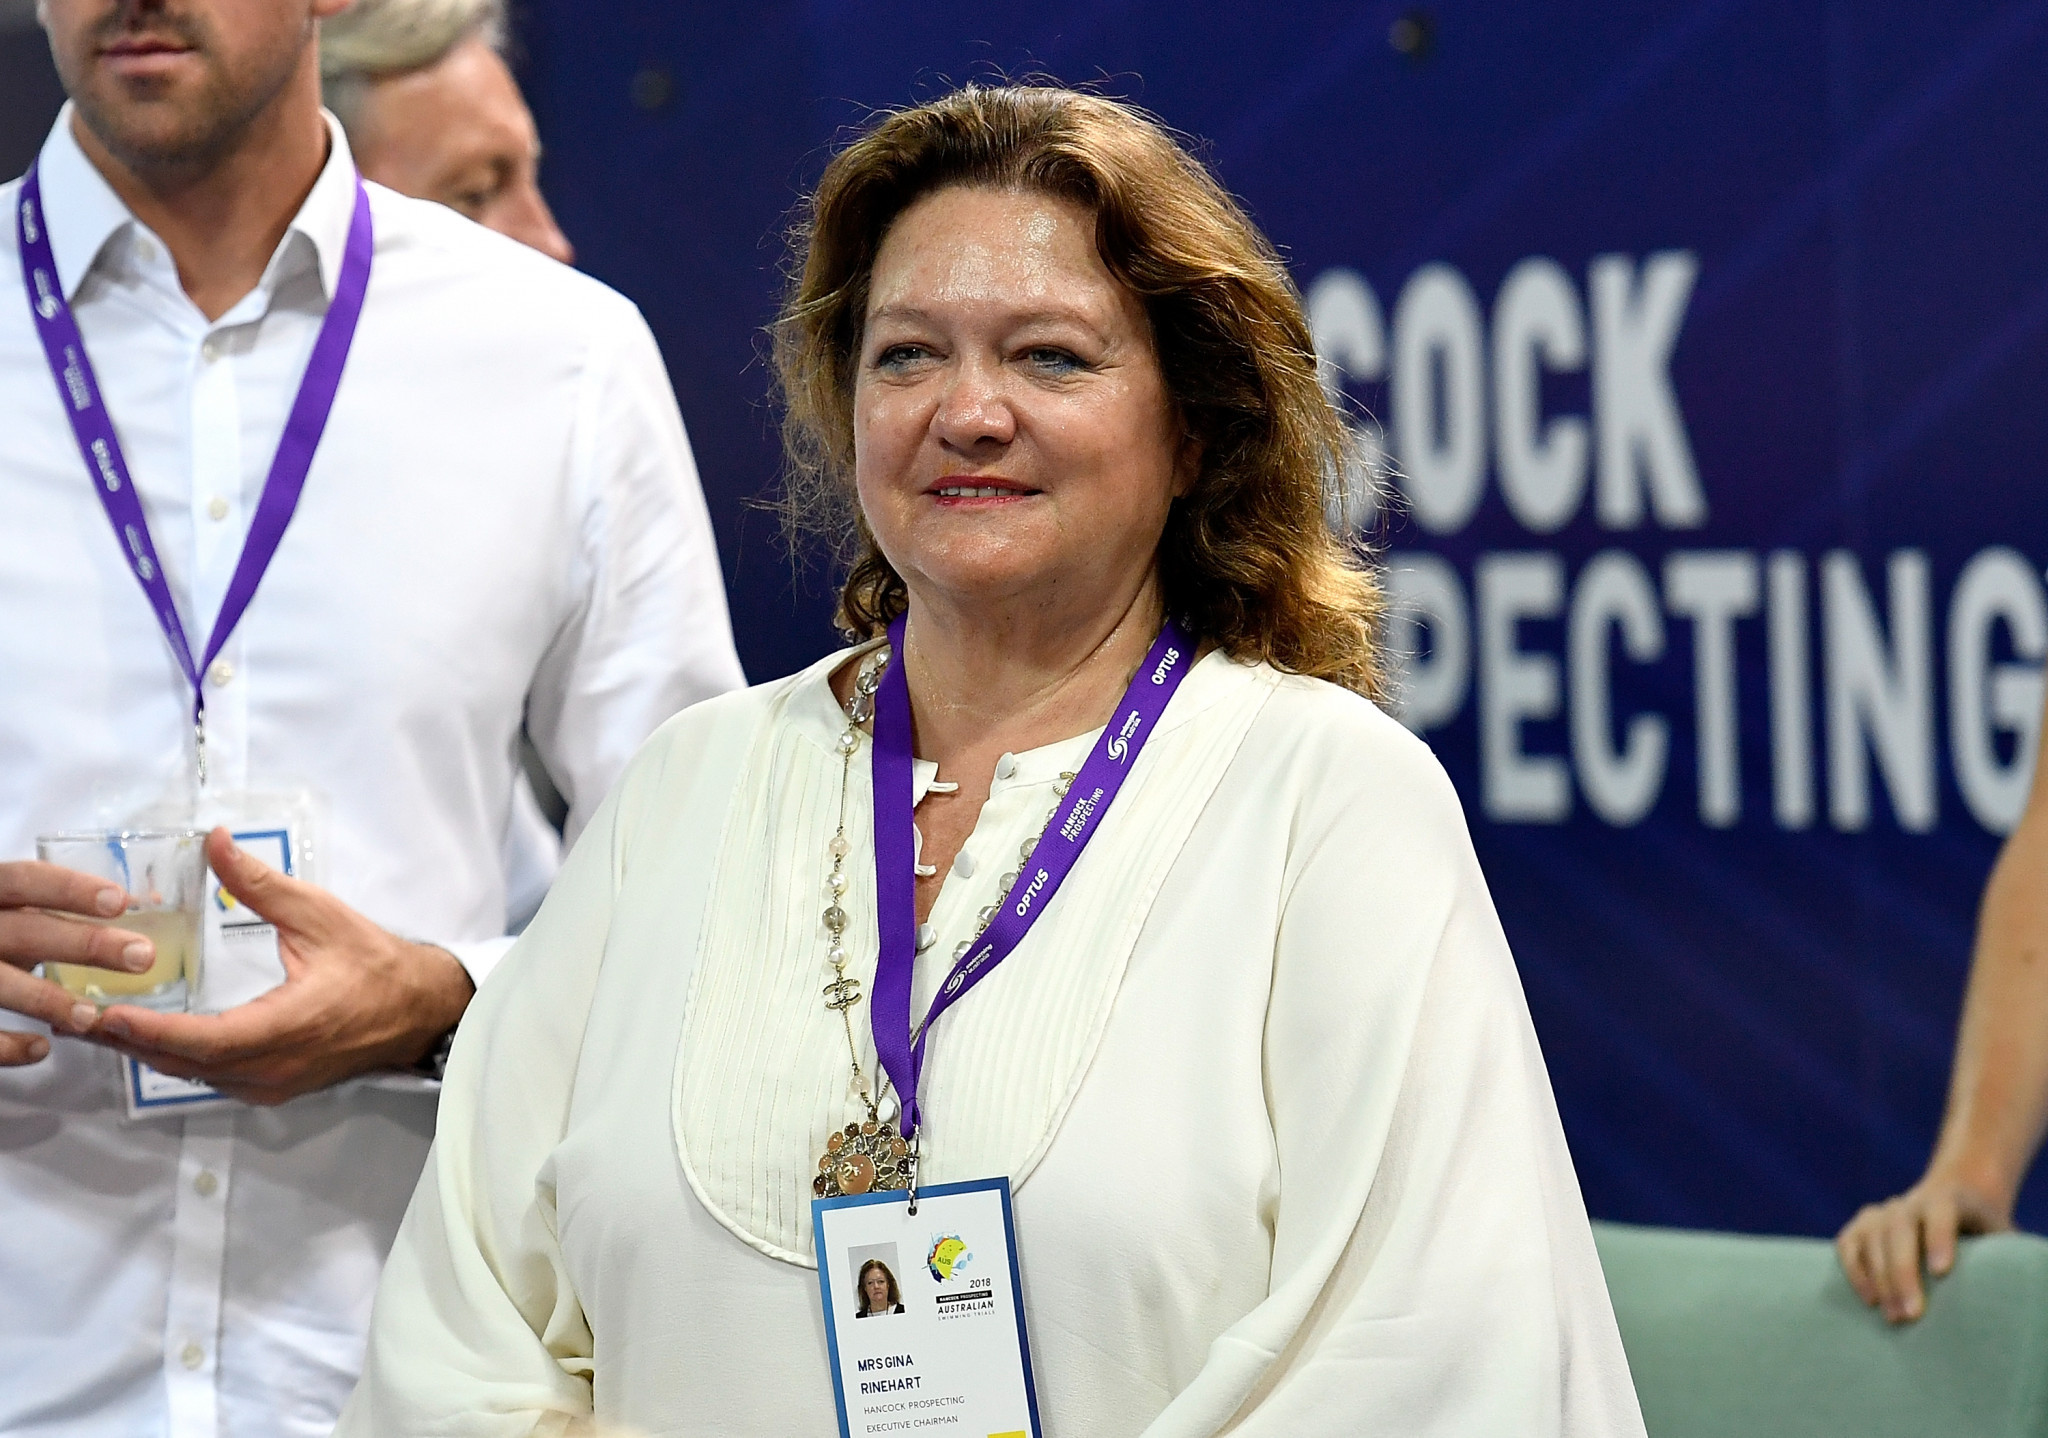 Gina Rinehart's Hancock Prospecting has made further investment into Australian sport ©Getty Images